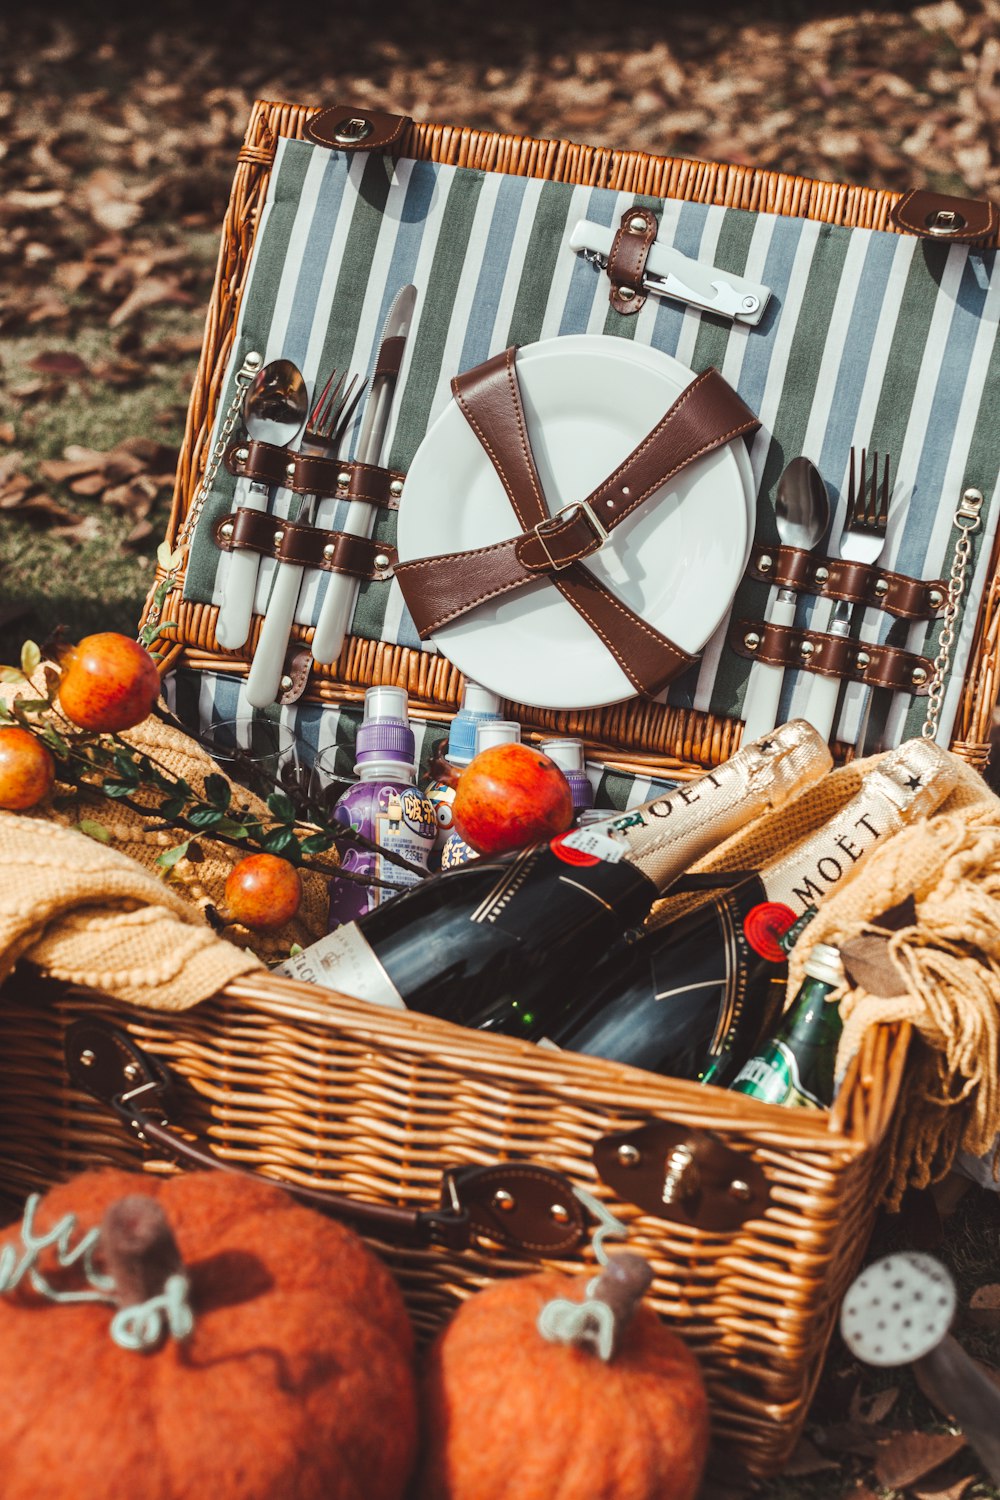 a picnic basket filled with food and drinks